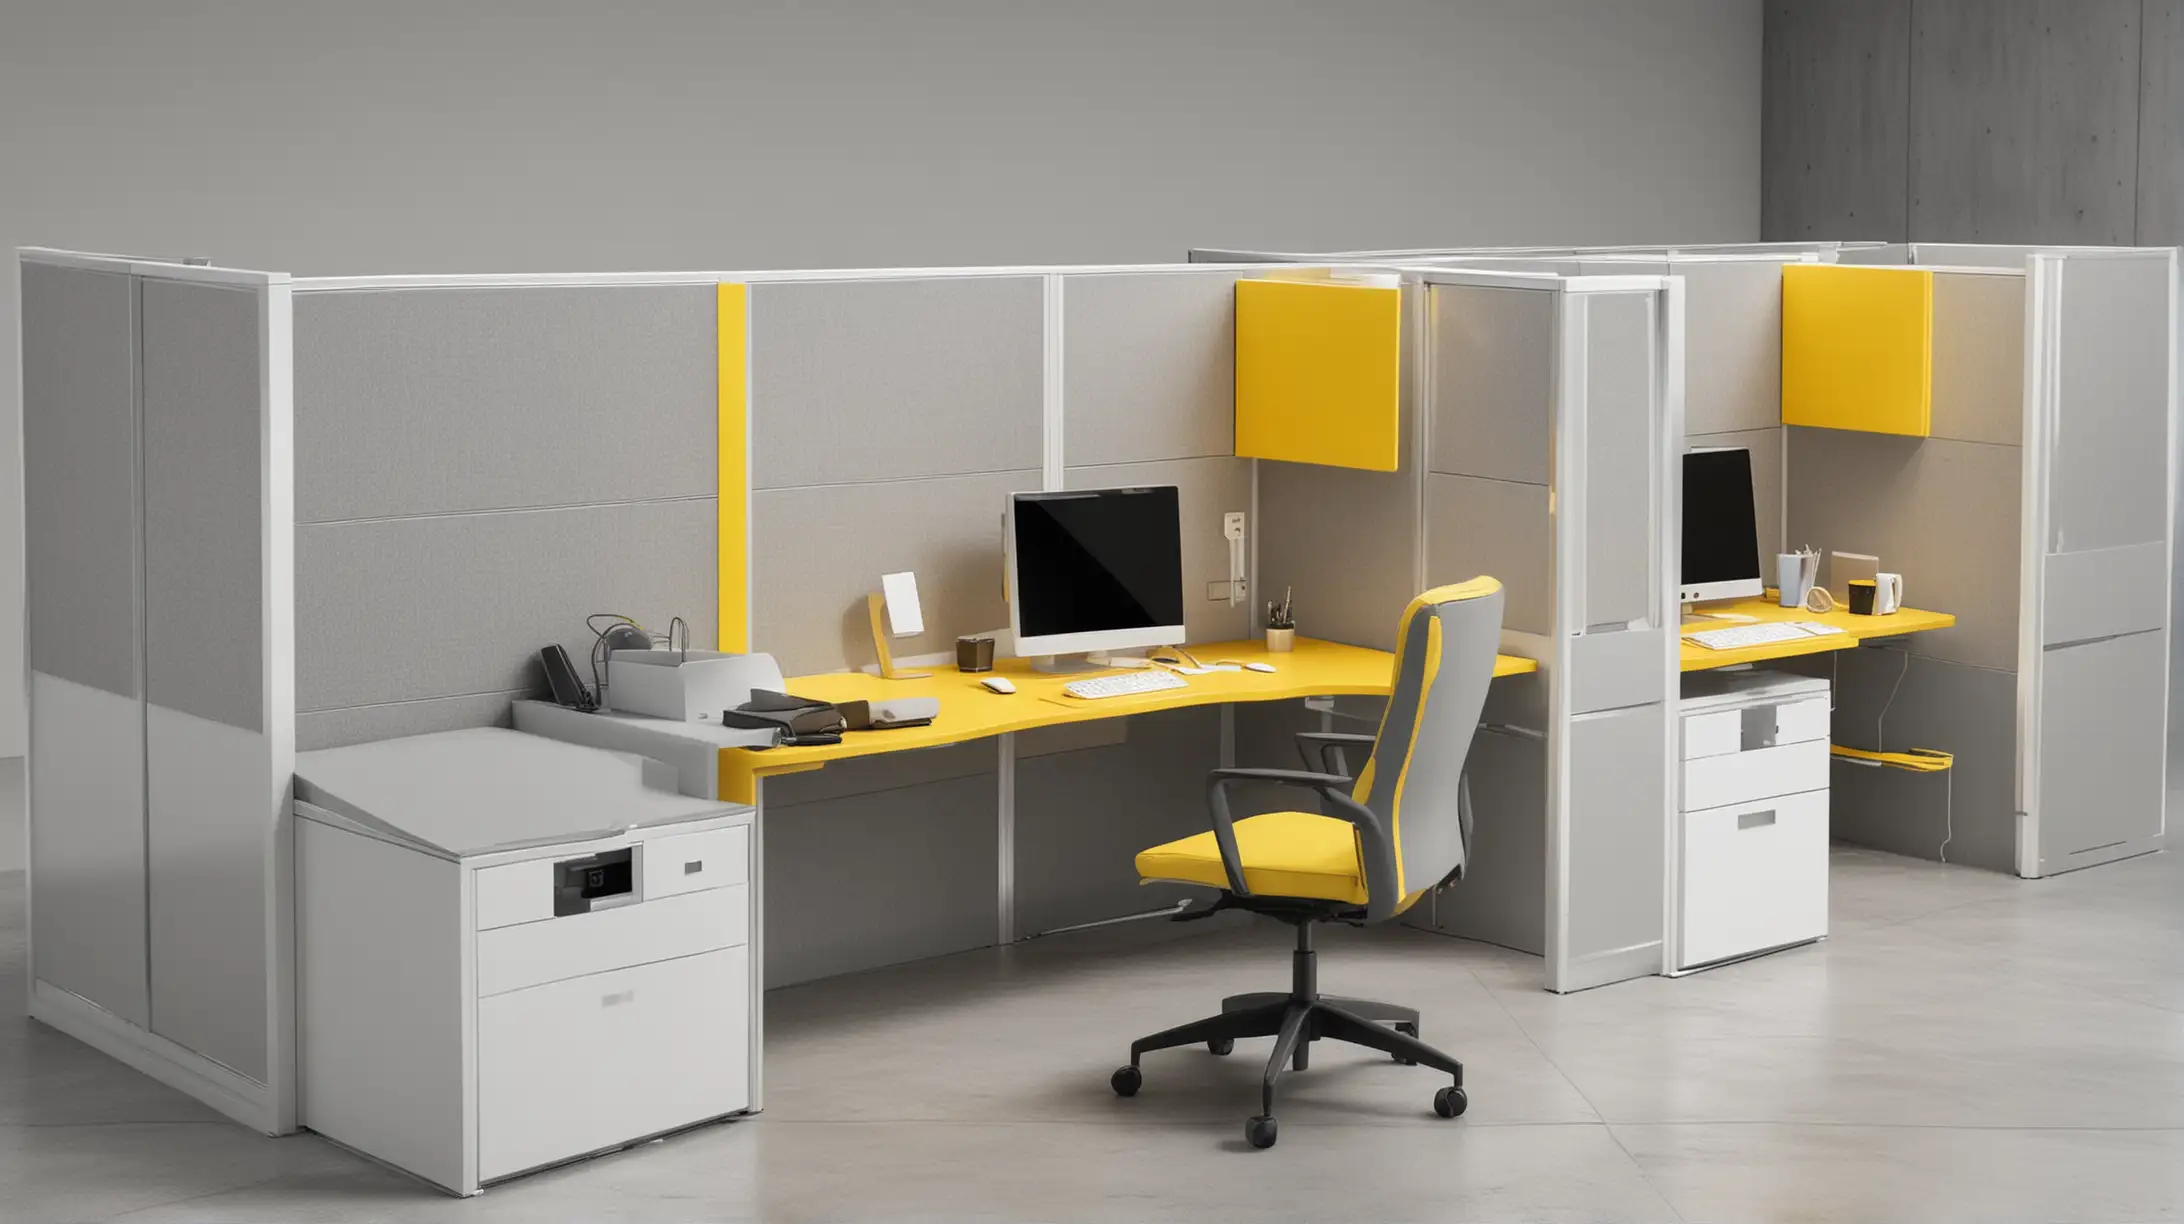 a exclusive cubicle for call center with minimalist and digital look, with computer and telephone, with the collor of grey and white and a splash of yellow